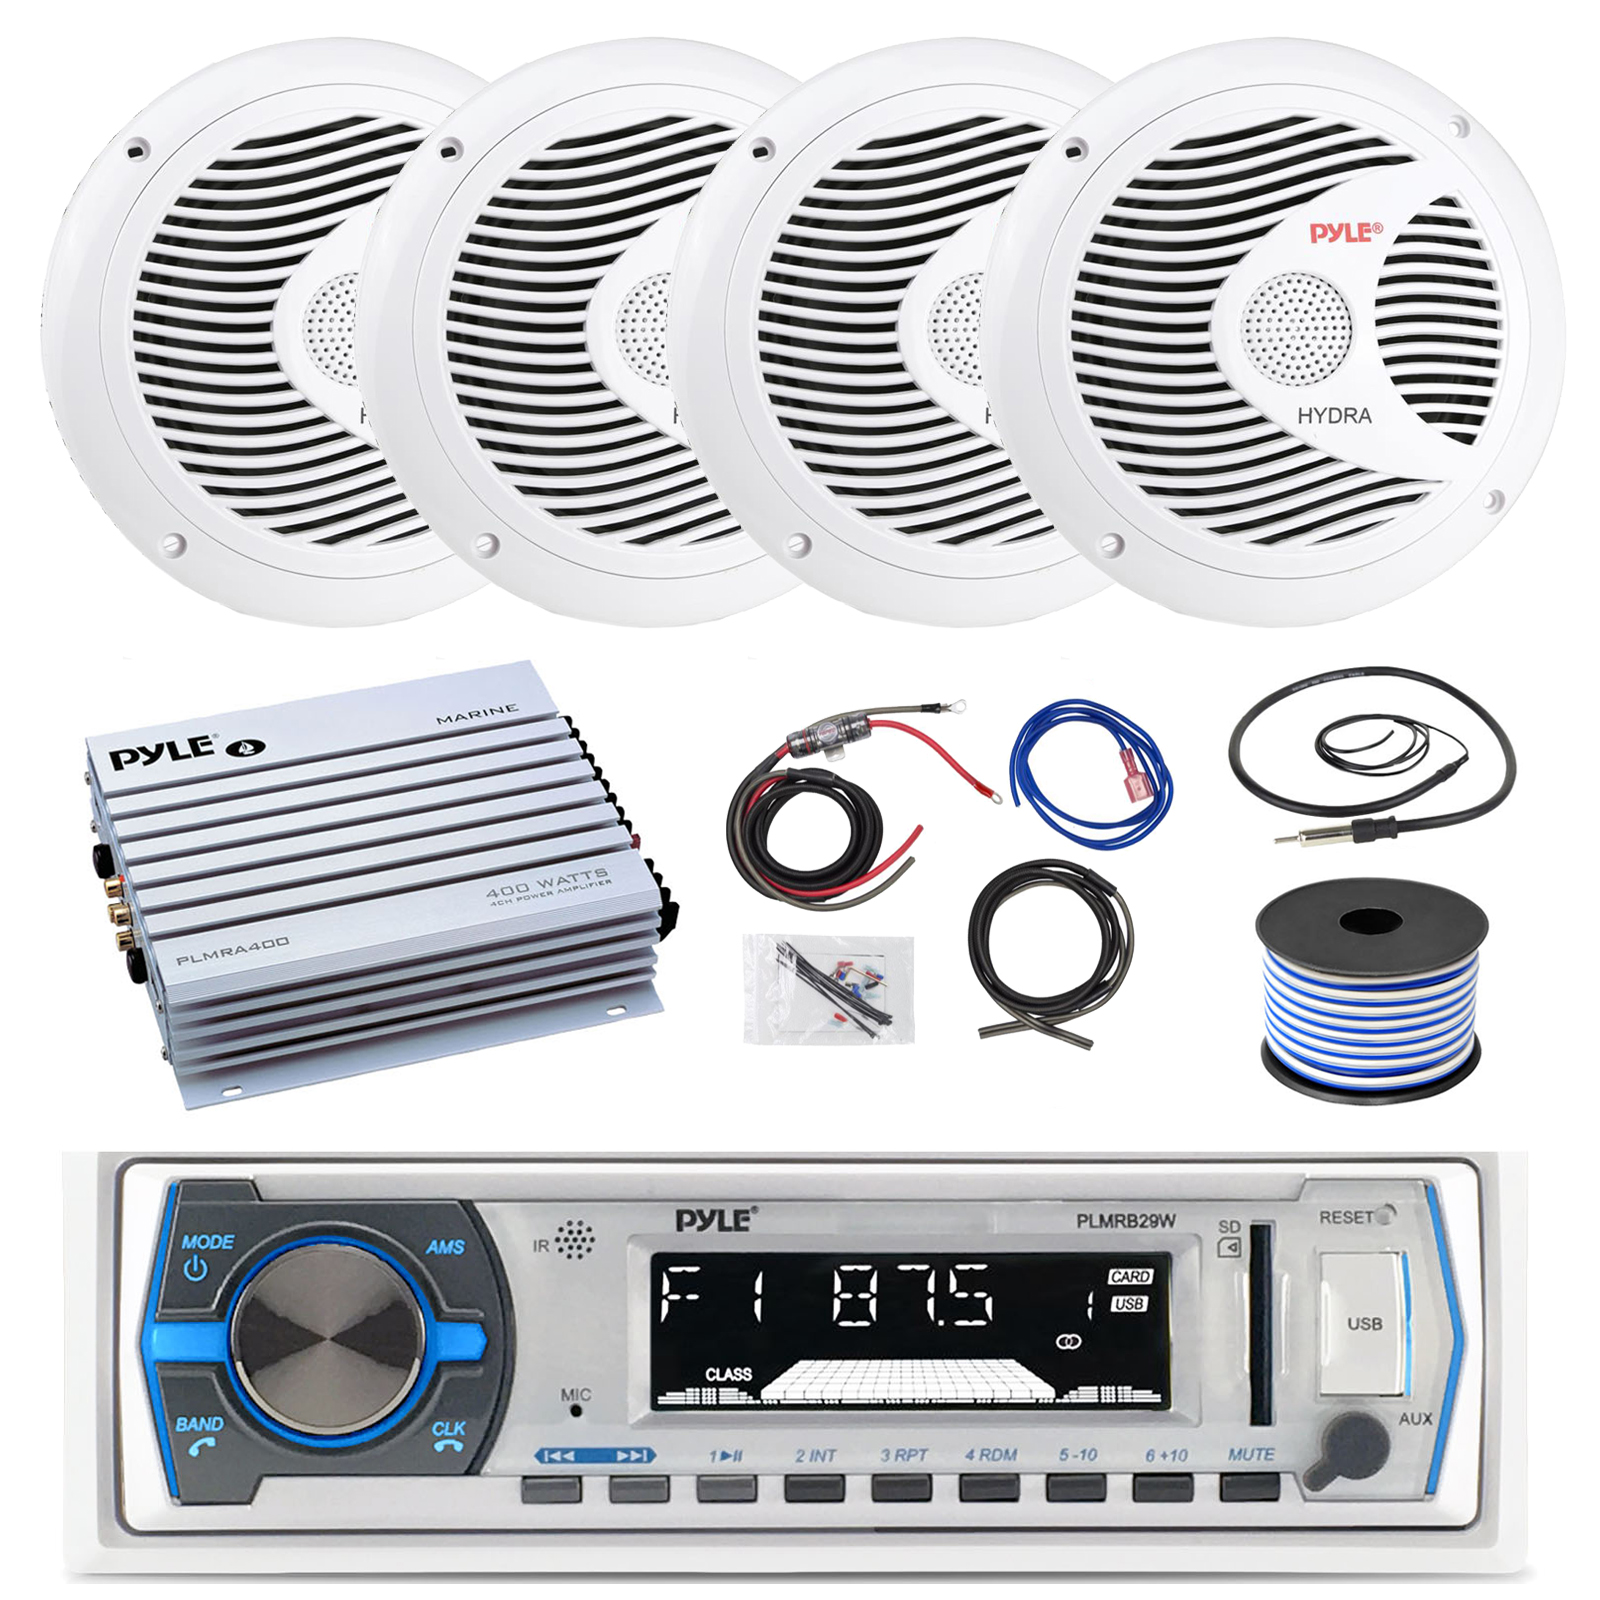 16-25' Bay Boat: Pyle Bluetooth Marine Stereo Receiver, 4 x Pyle 150W 6.5'' Marine Speakers (White), Pyle 4 Channel Waterproof Amplifier, Pyle Amp Install Kit, 18 Gauge 50 FT Speaker Wire, Antenna - image 1 of 7